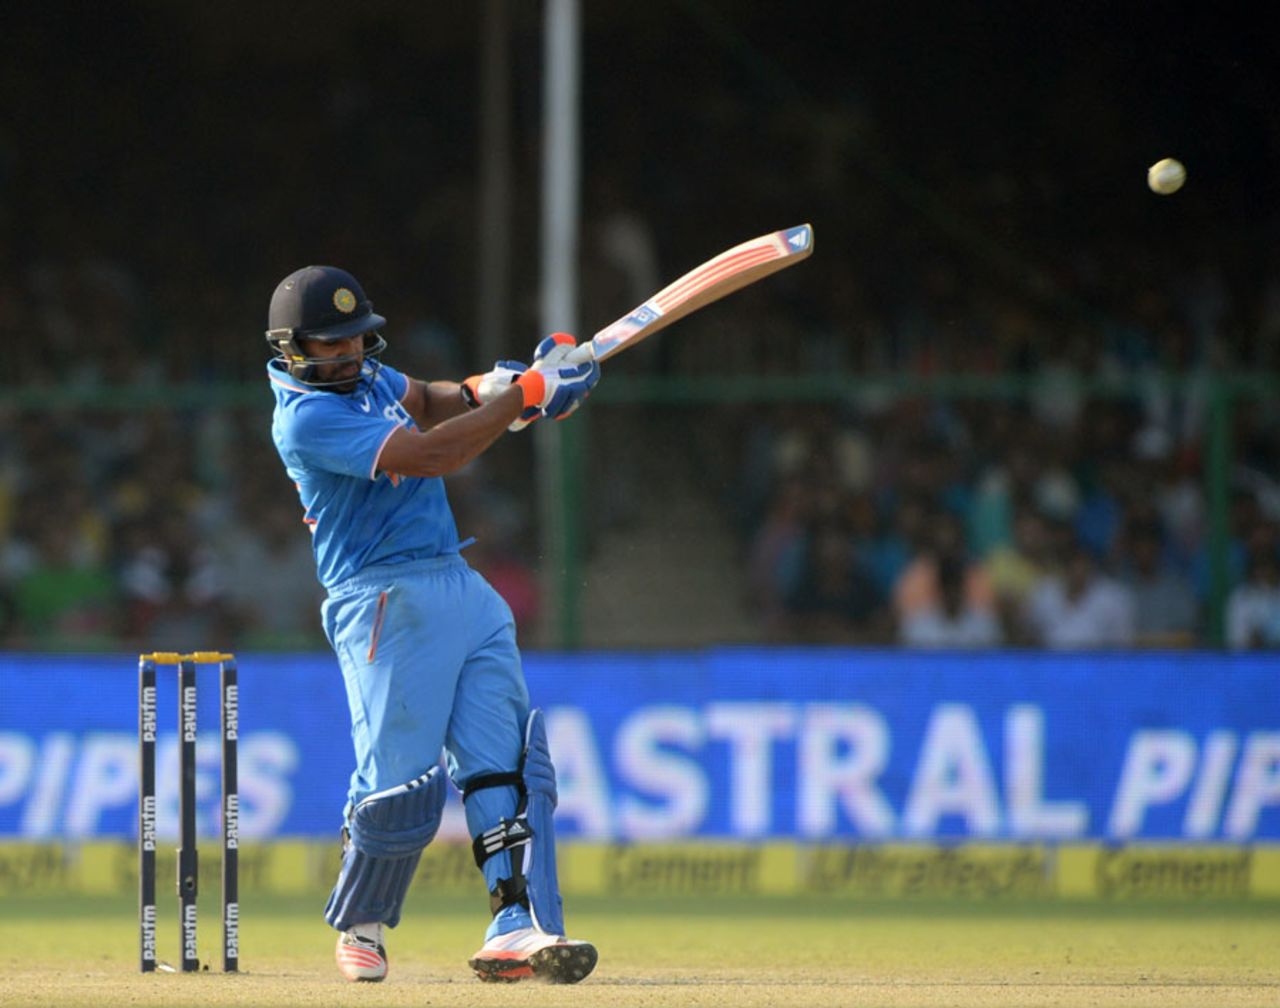 Rohit Sharma pulls en route to his 150, India v South Africa, 1st ODI, Kanpur, October 11, 2015